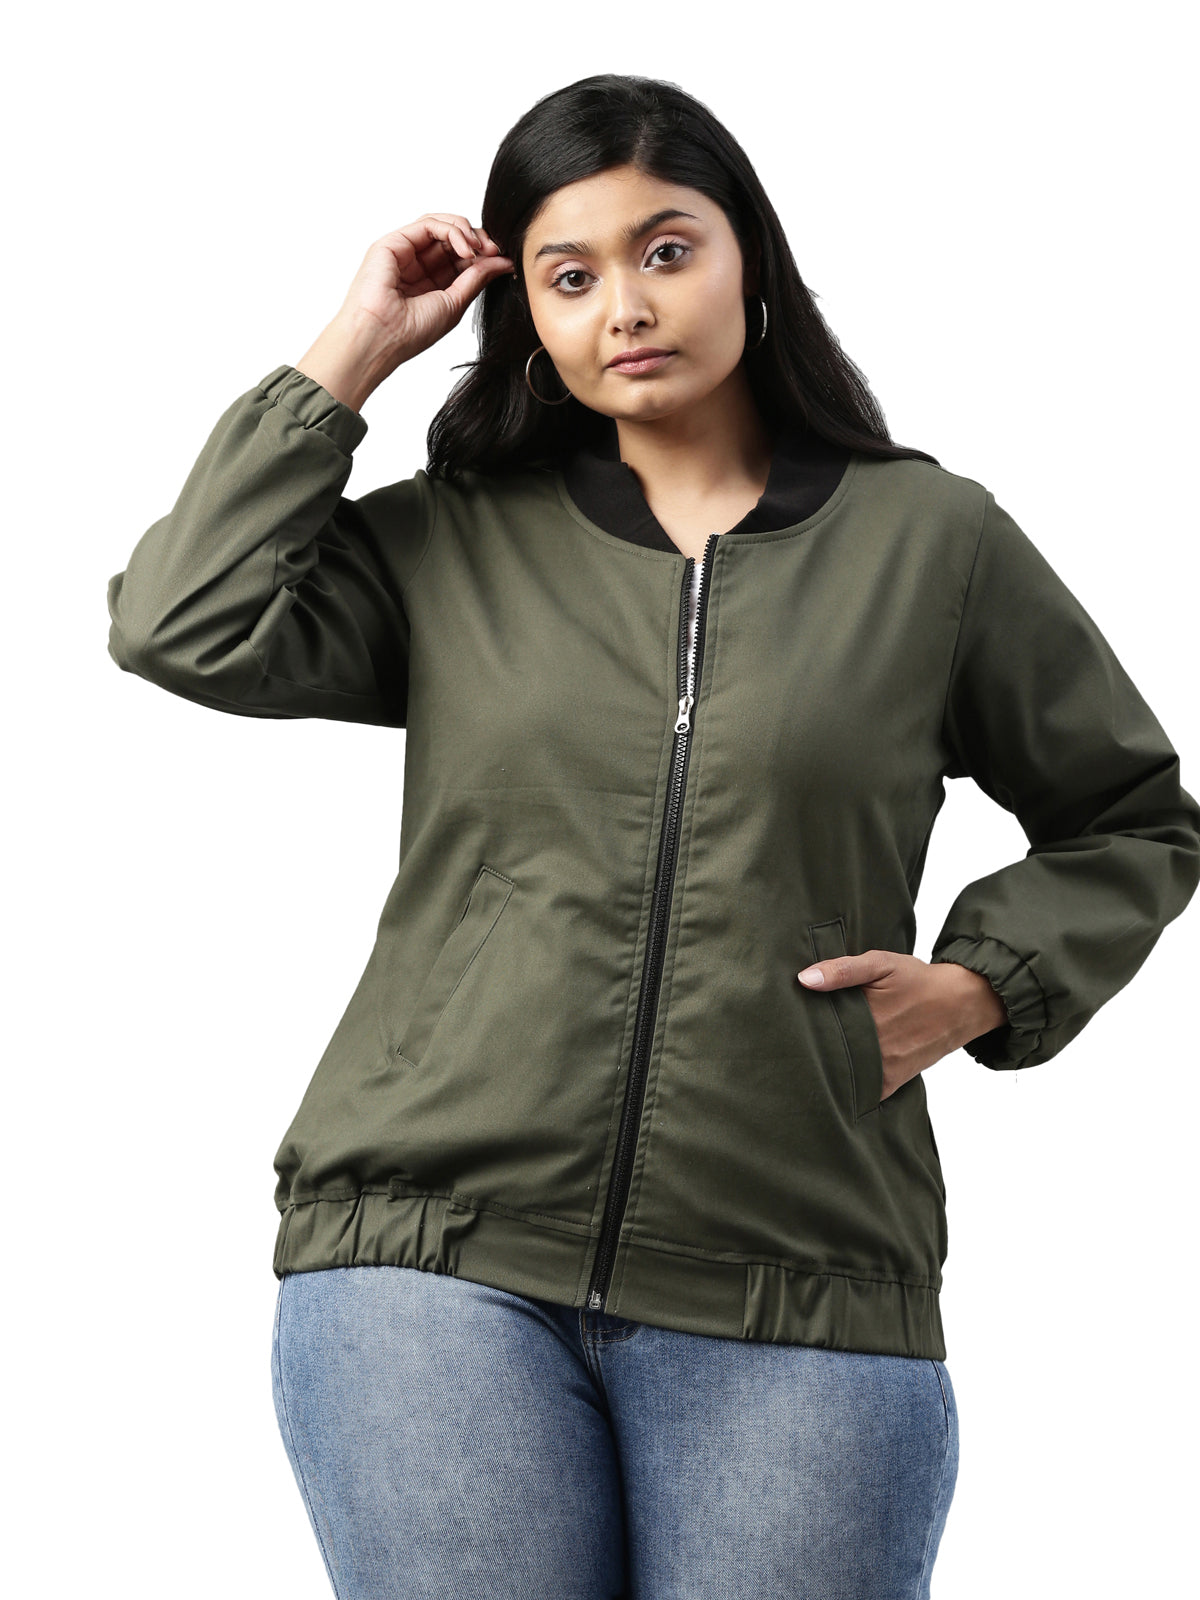 Plus Size Casual Jackets